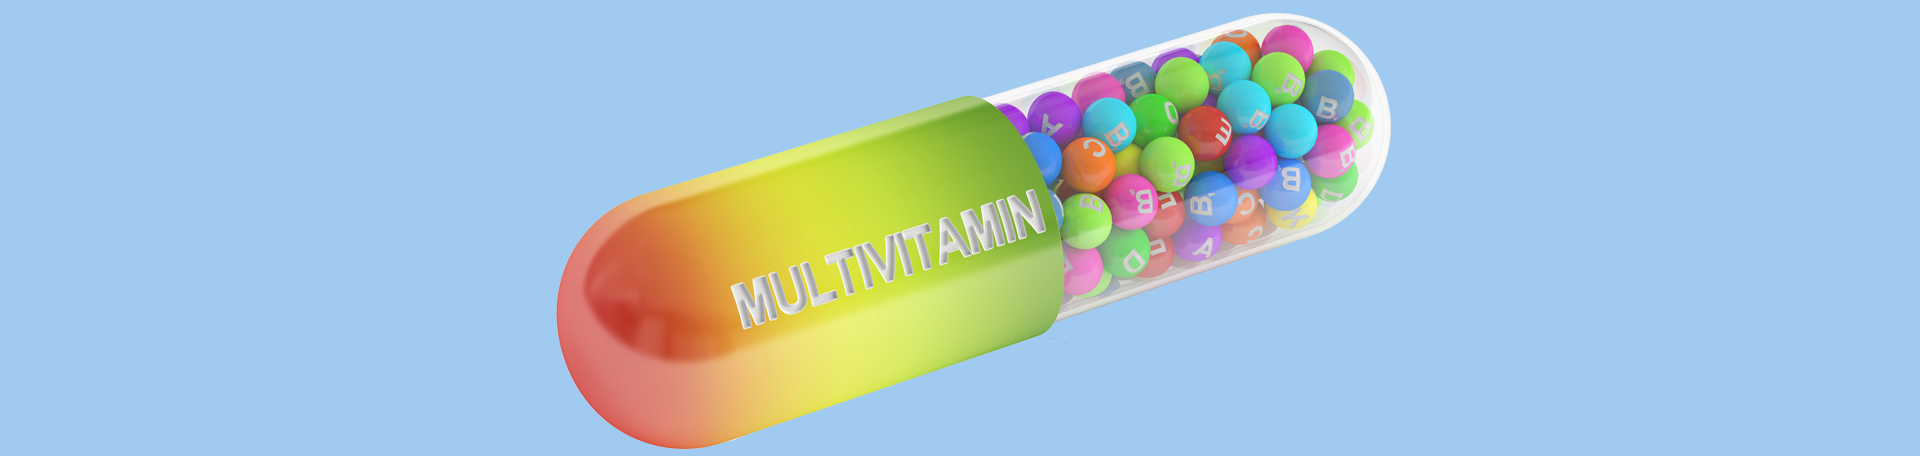 Richmond multivitamin picture to demonstrate benefits for memory and cognition